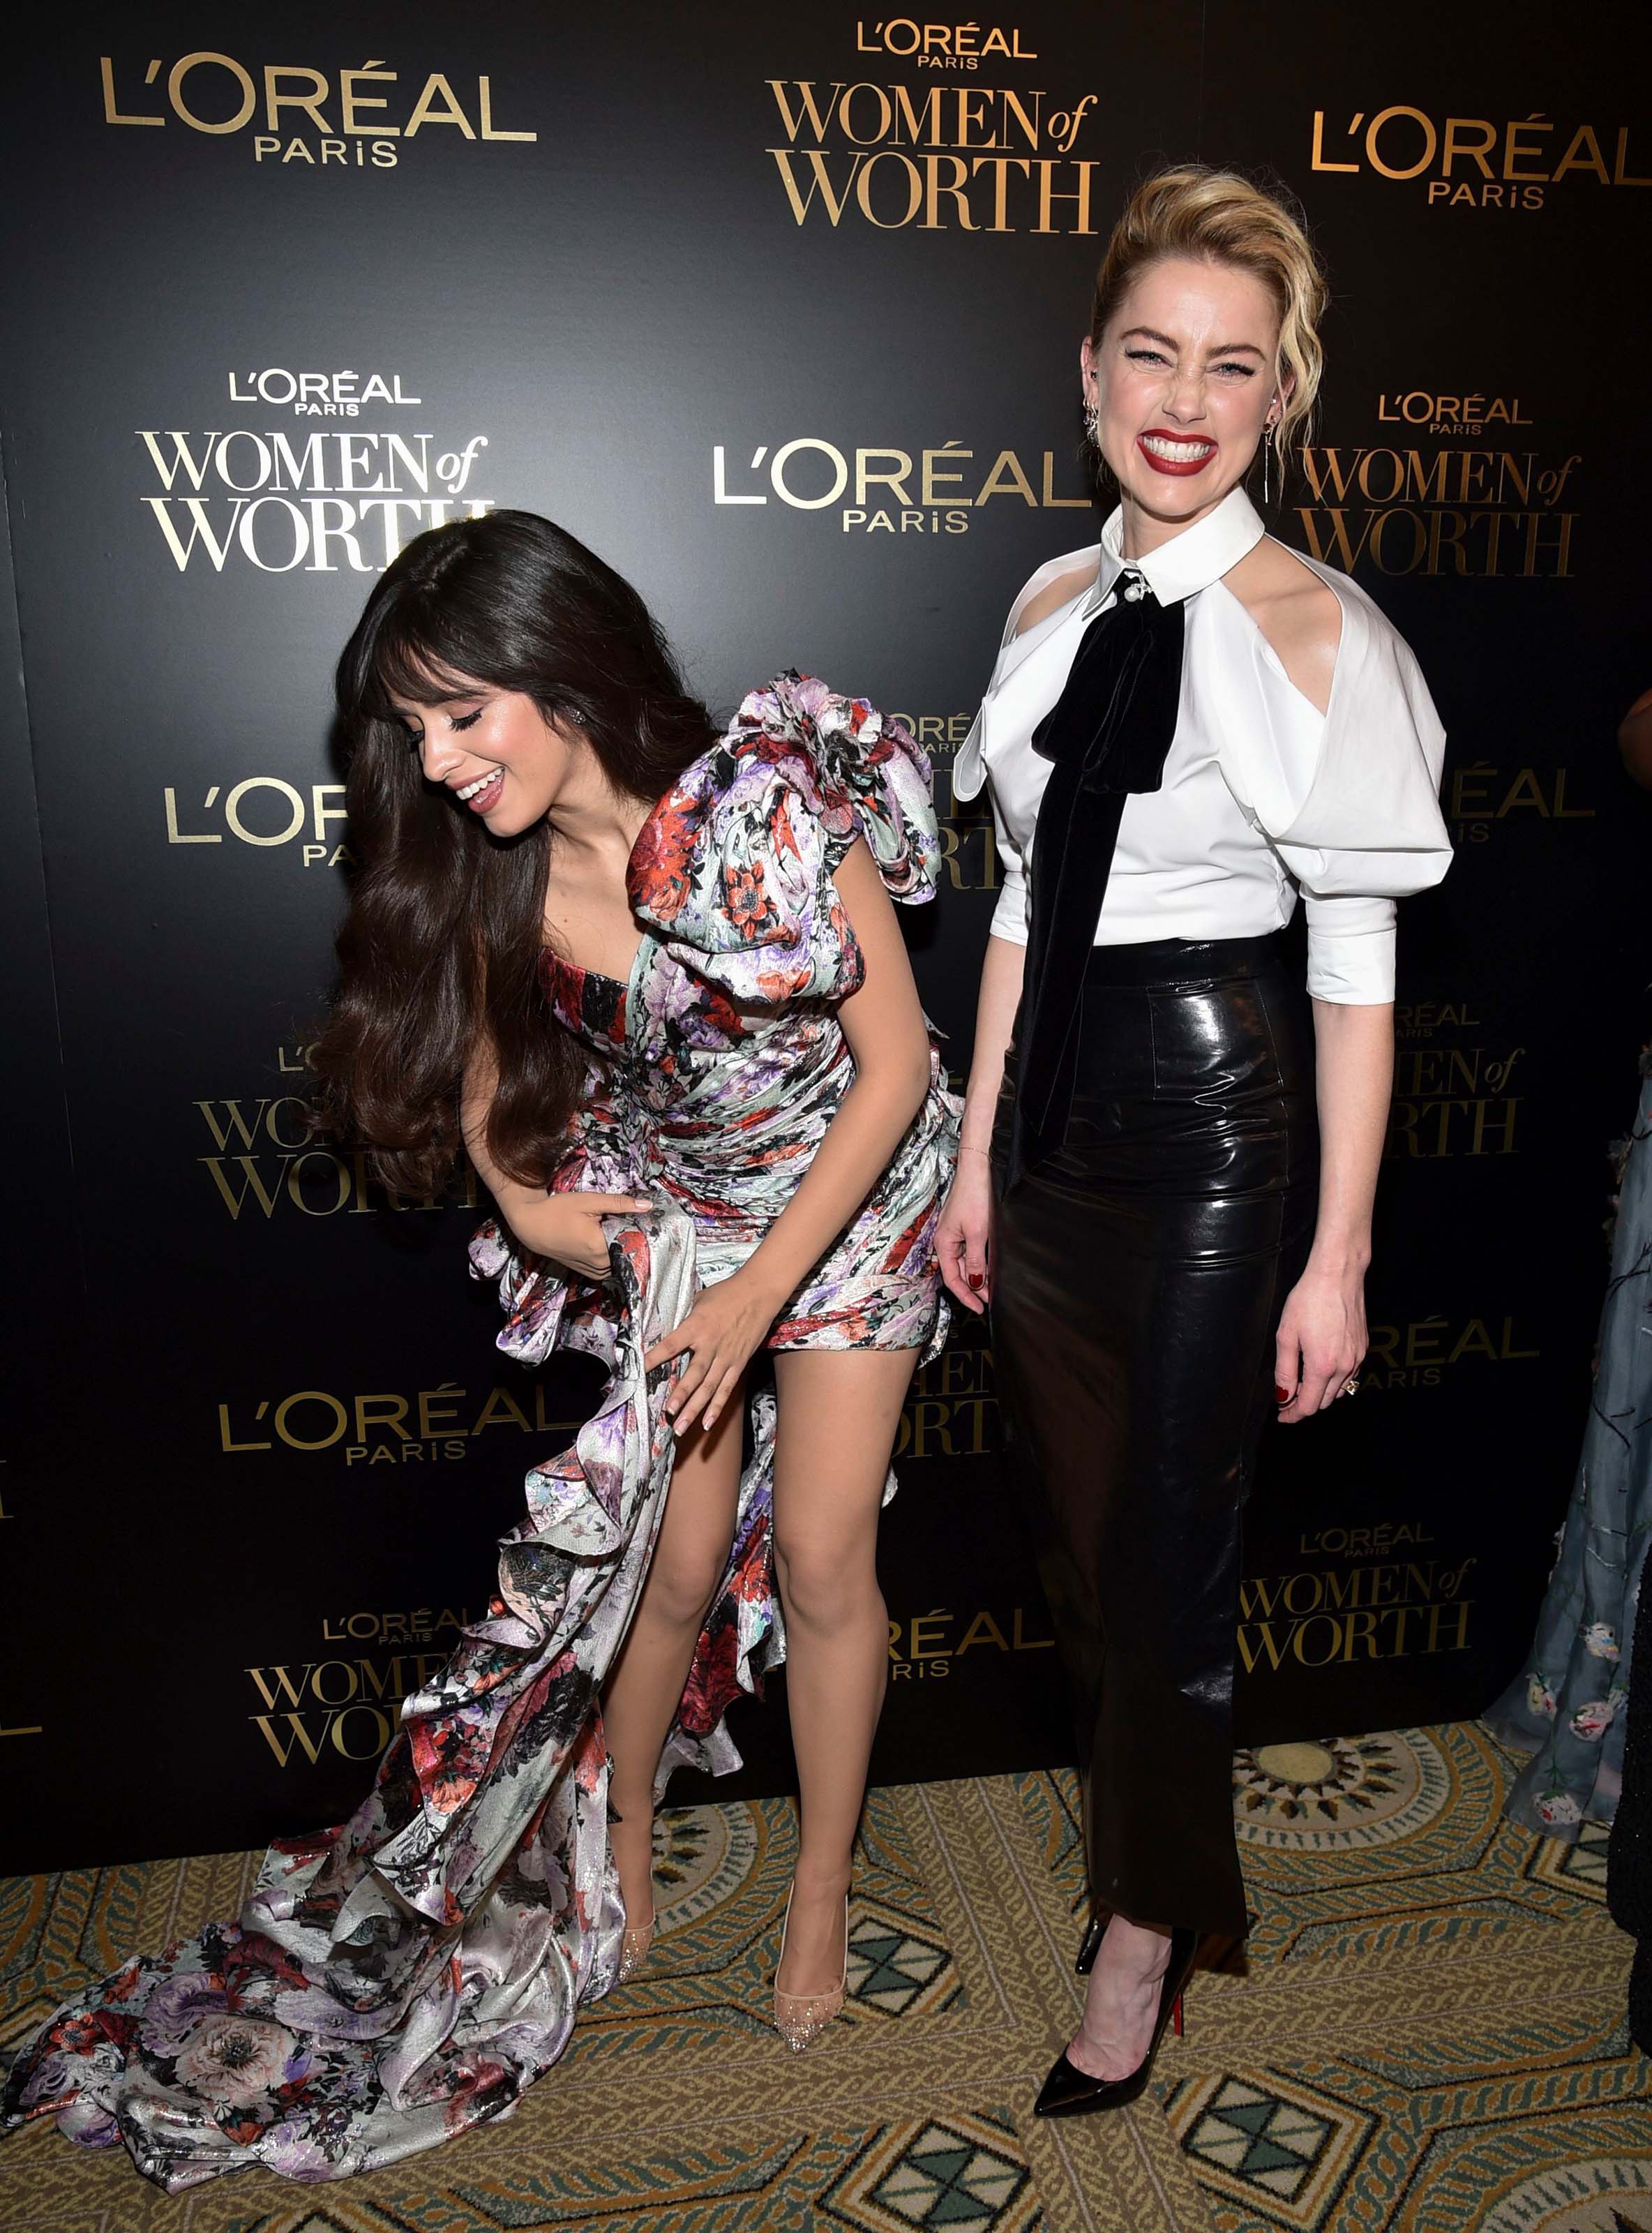 Amber Heard attends 14th Annual L’Oreal Paris Women Of Worth Awards